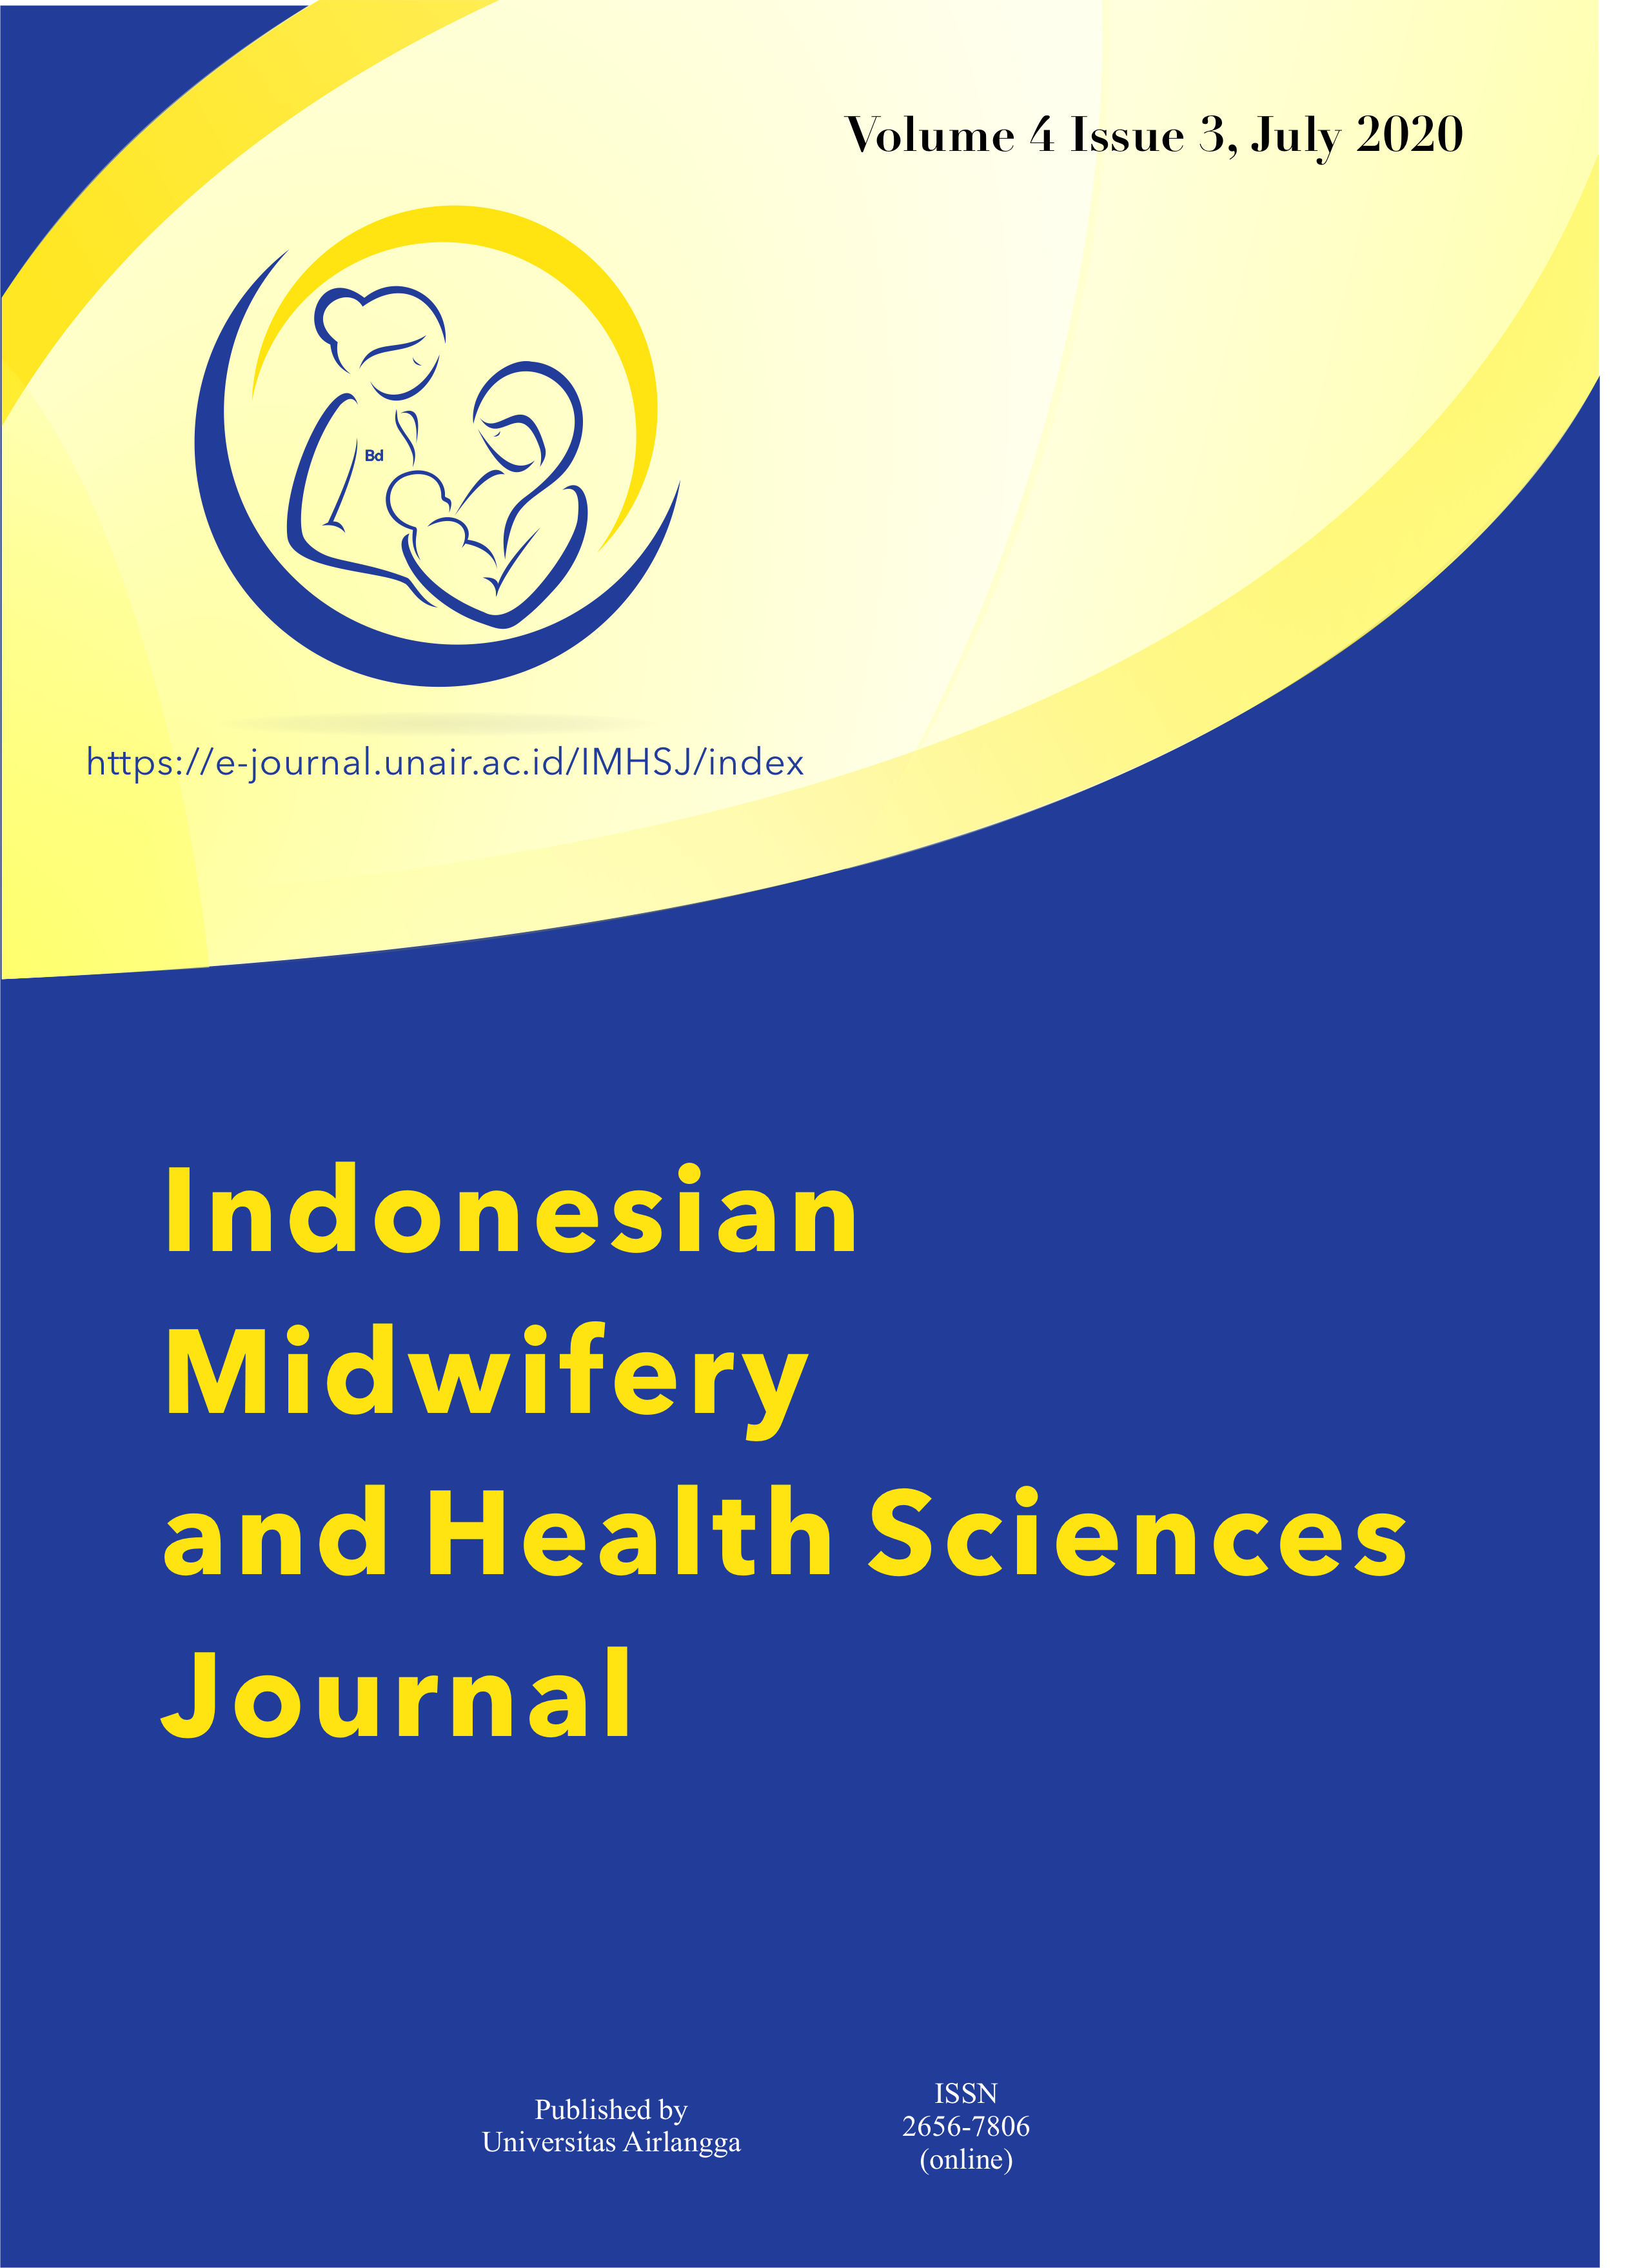 						View Vol. 4 No. 3 (2020): Indonesian Midwifery and Health Sciences Journal, July 2020
					